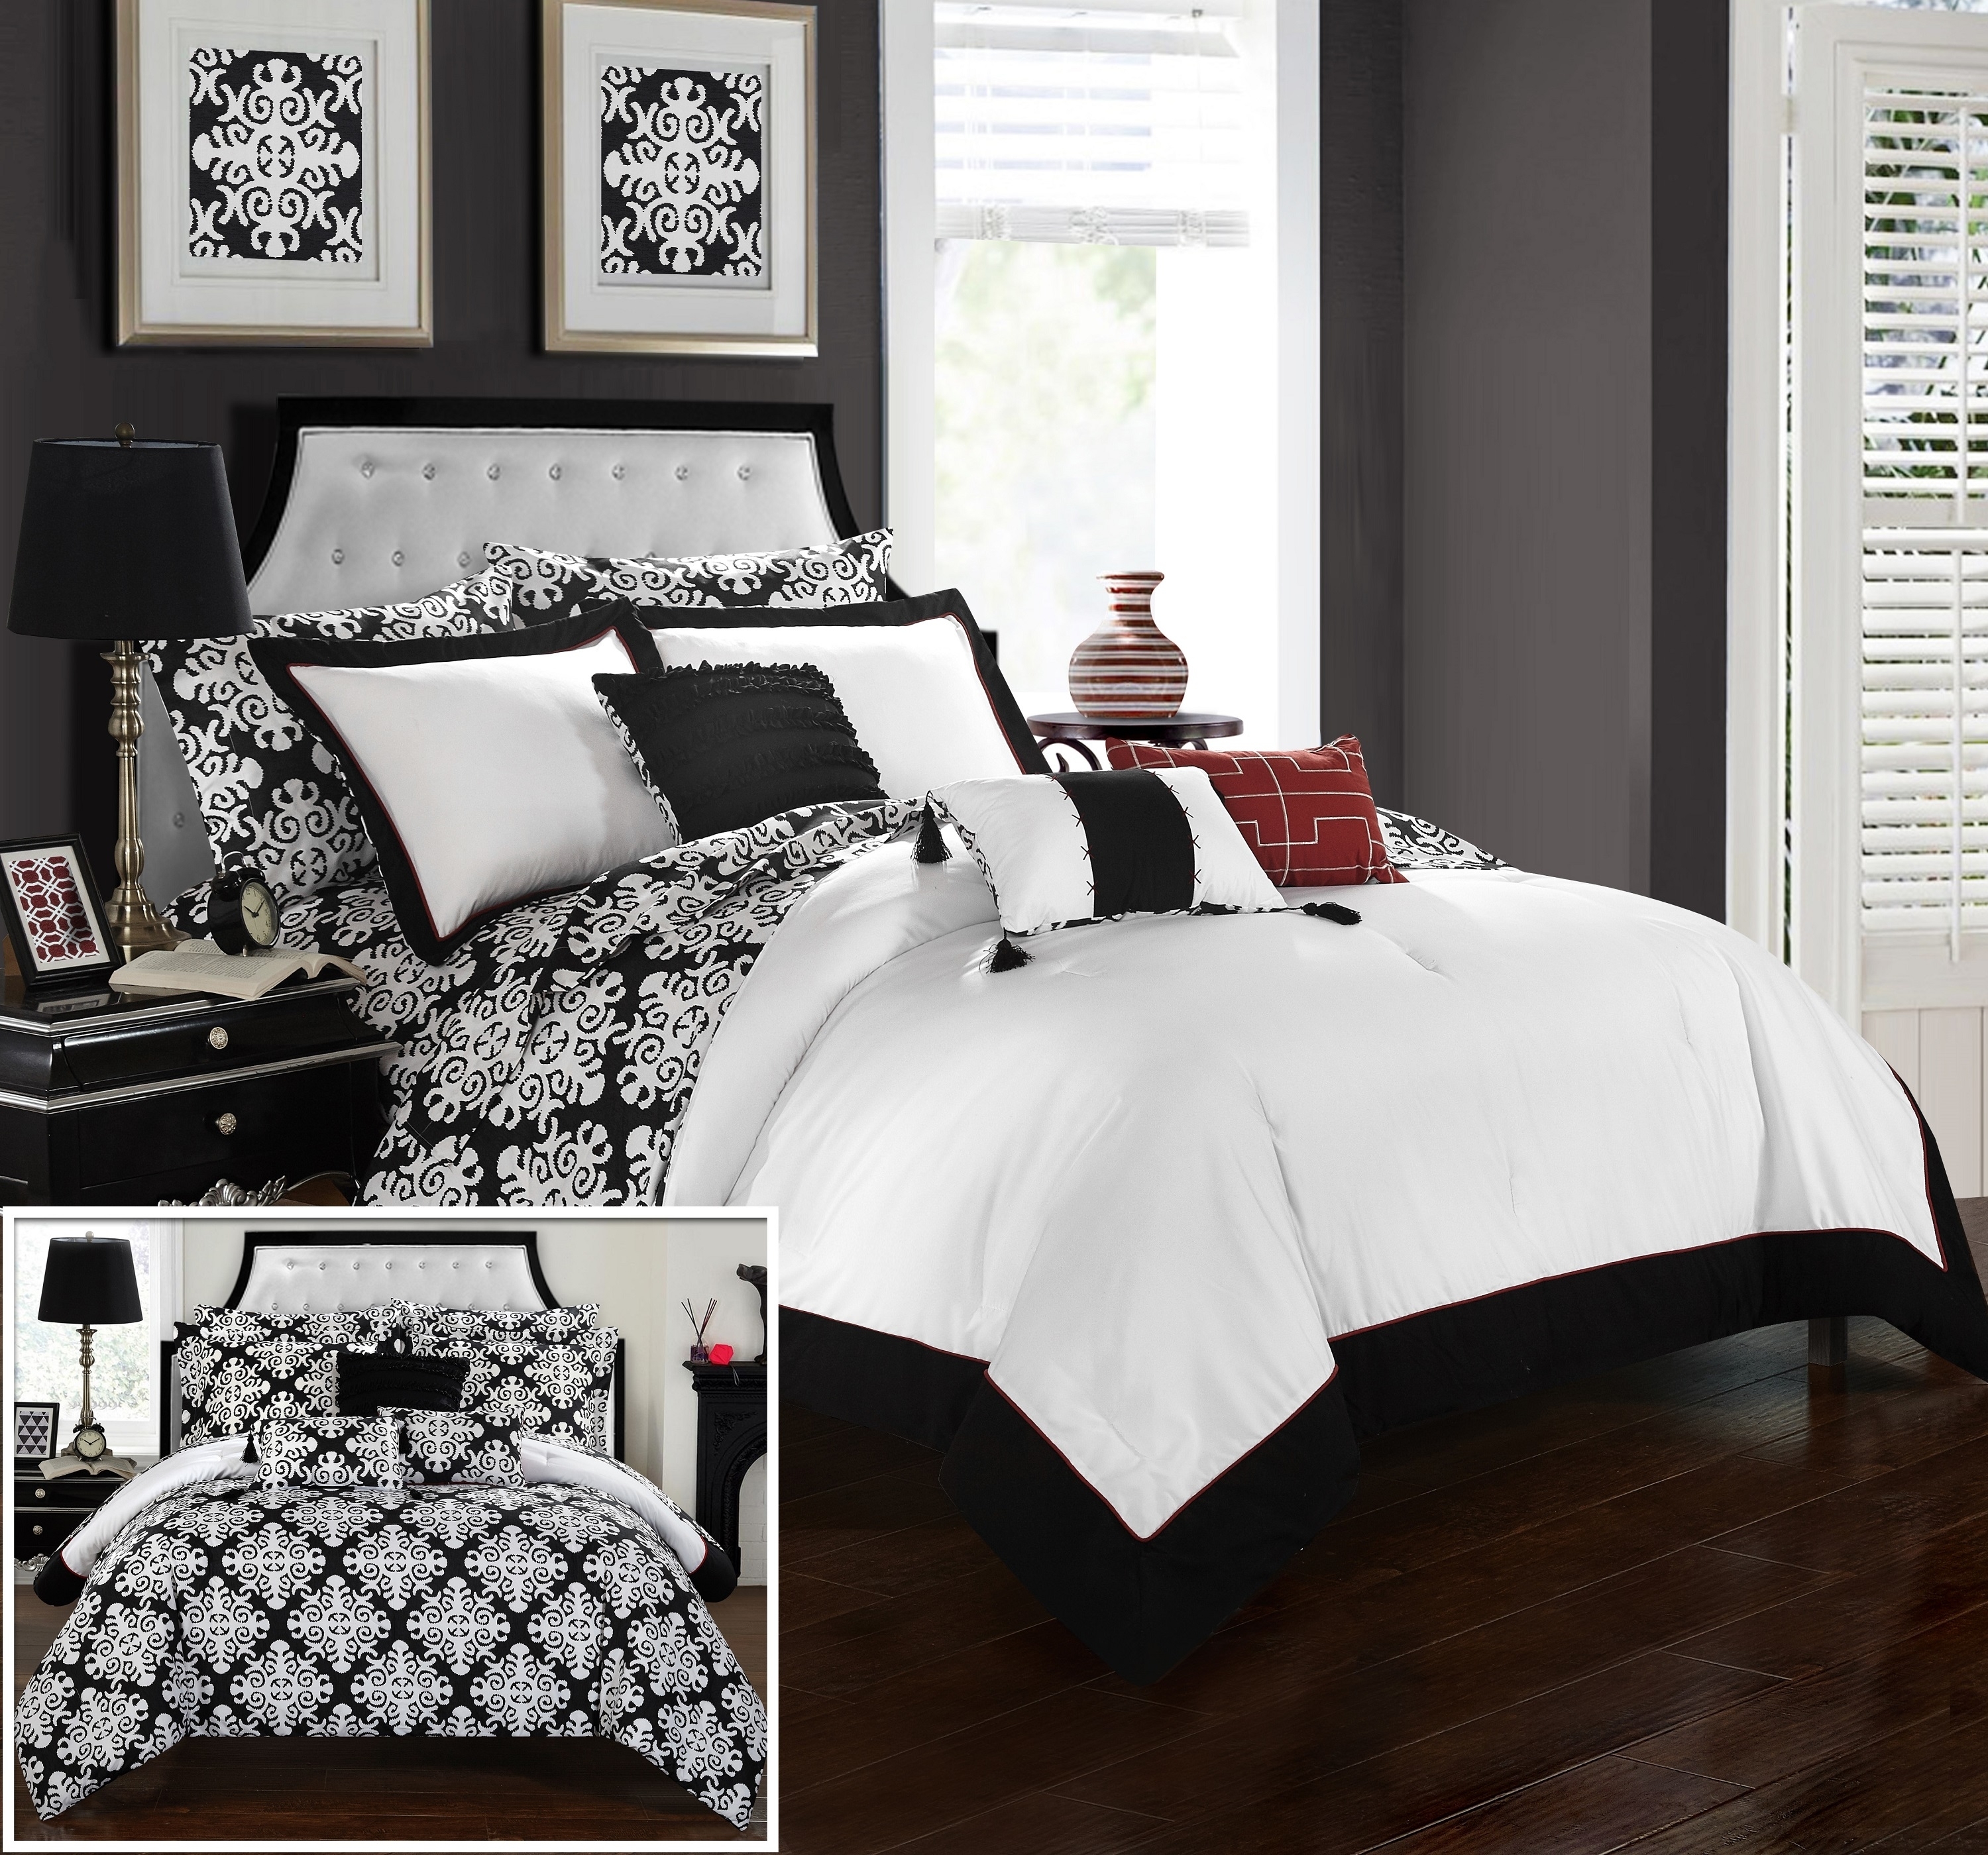 Chic Home 10 Piece Naira Black And White Reversible Medallion Printed Plush Hotel Collection Bed In A Bag Comforter Set With Sheet Set - Black, King